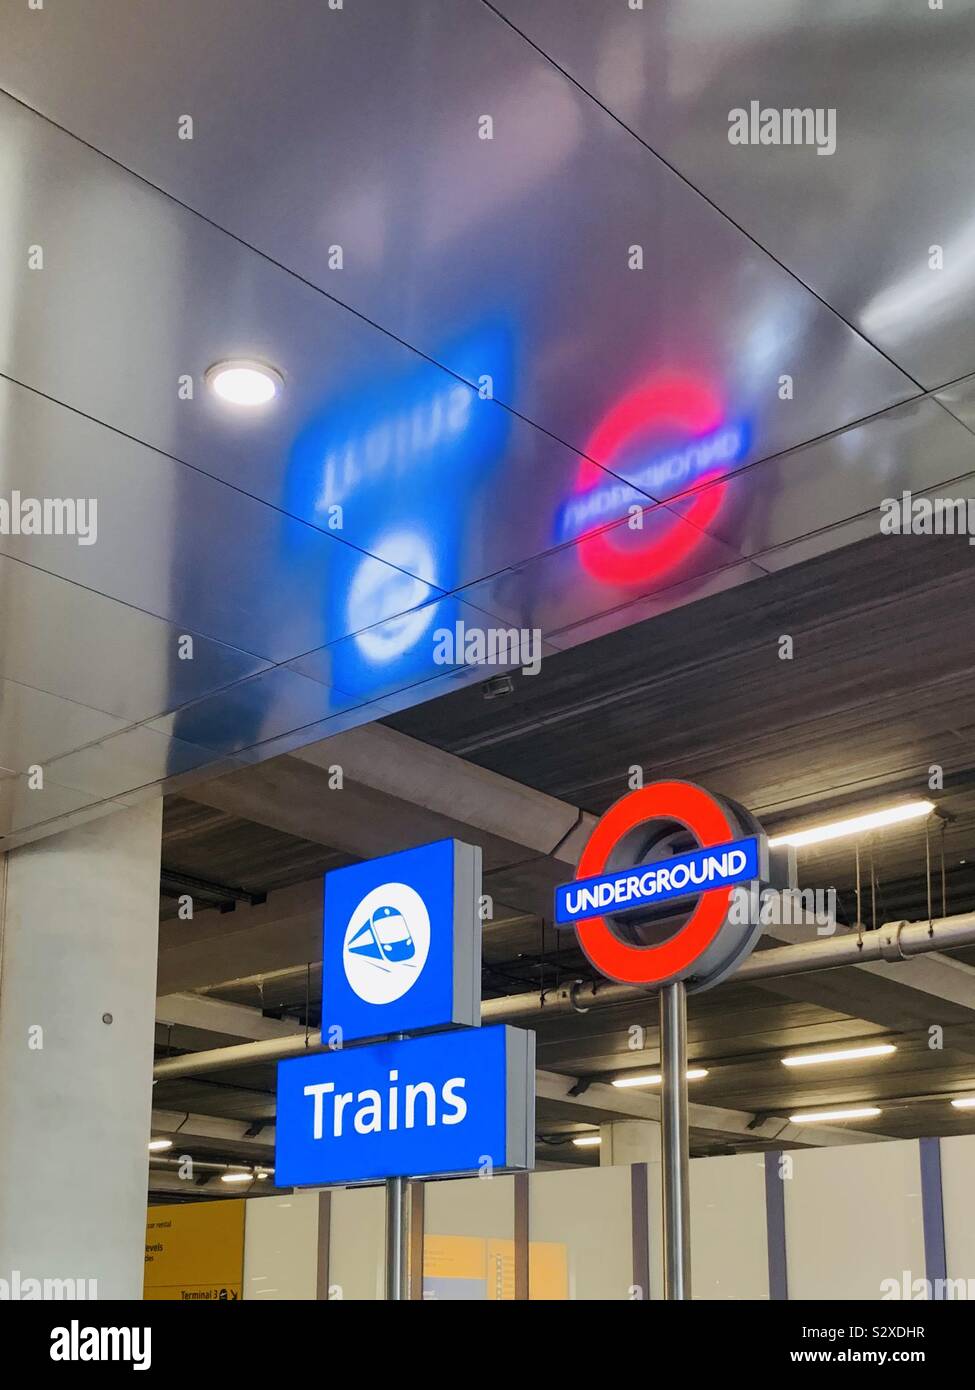 London, UK : 21 September 2019: Trains and Underground signs at Heathrow airport Terminal 2. Stock Photo